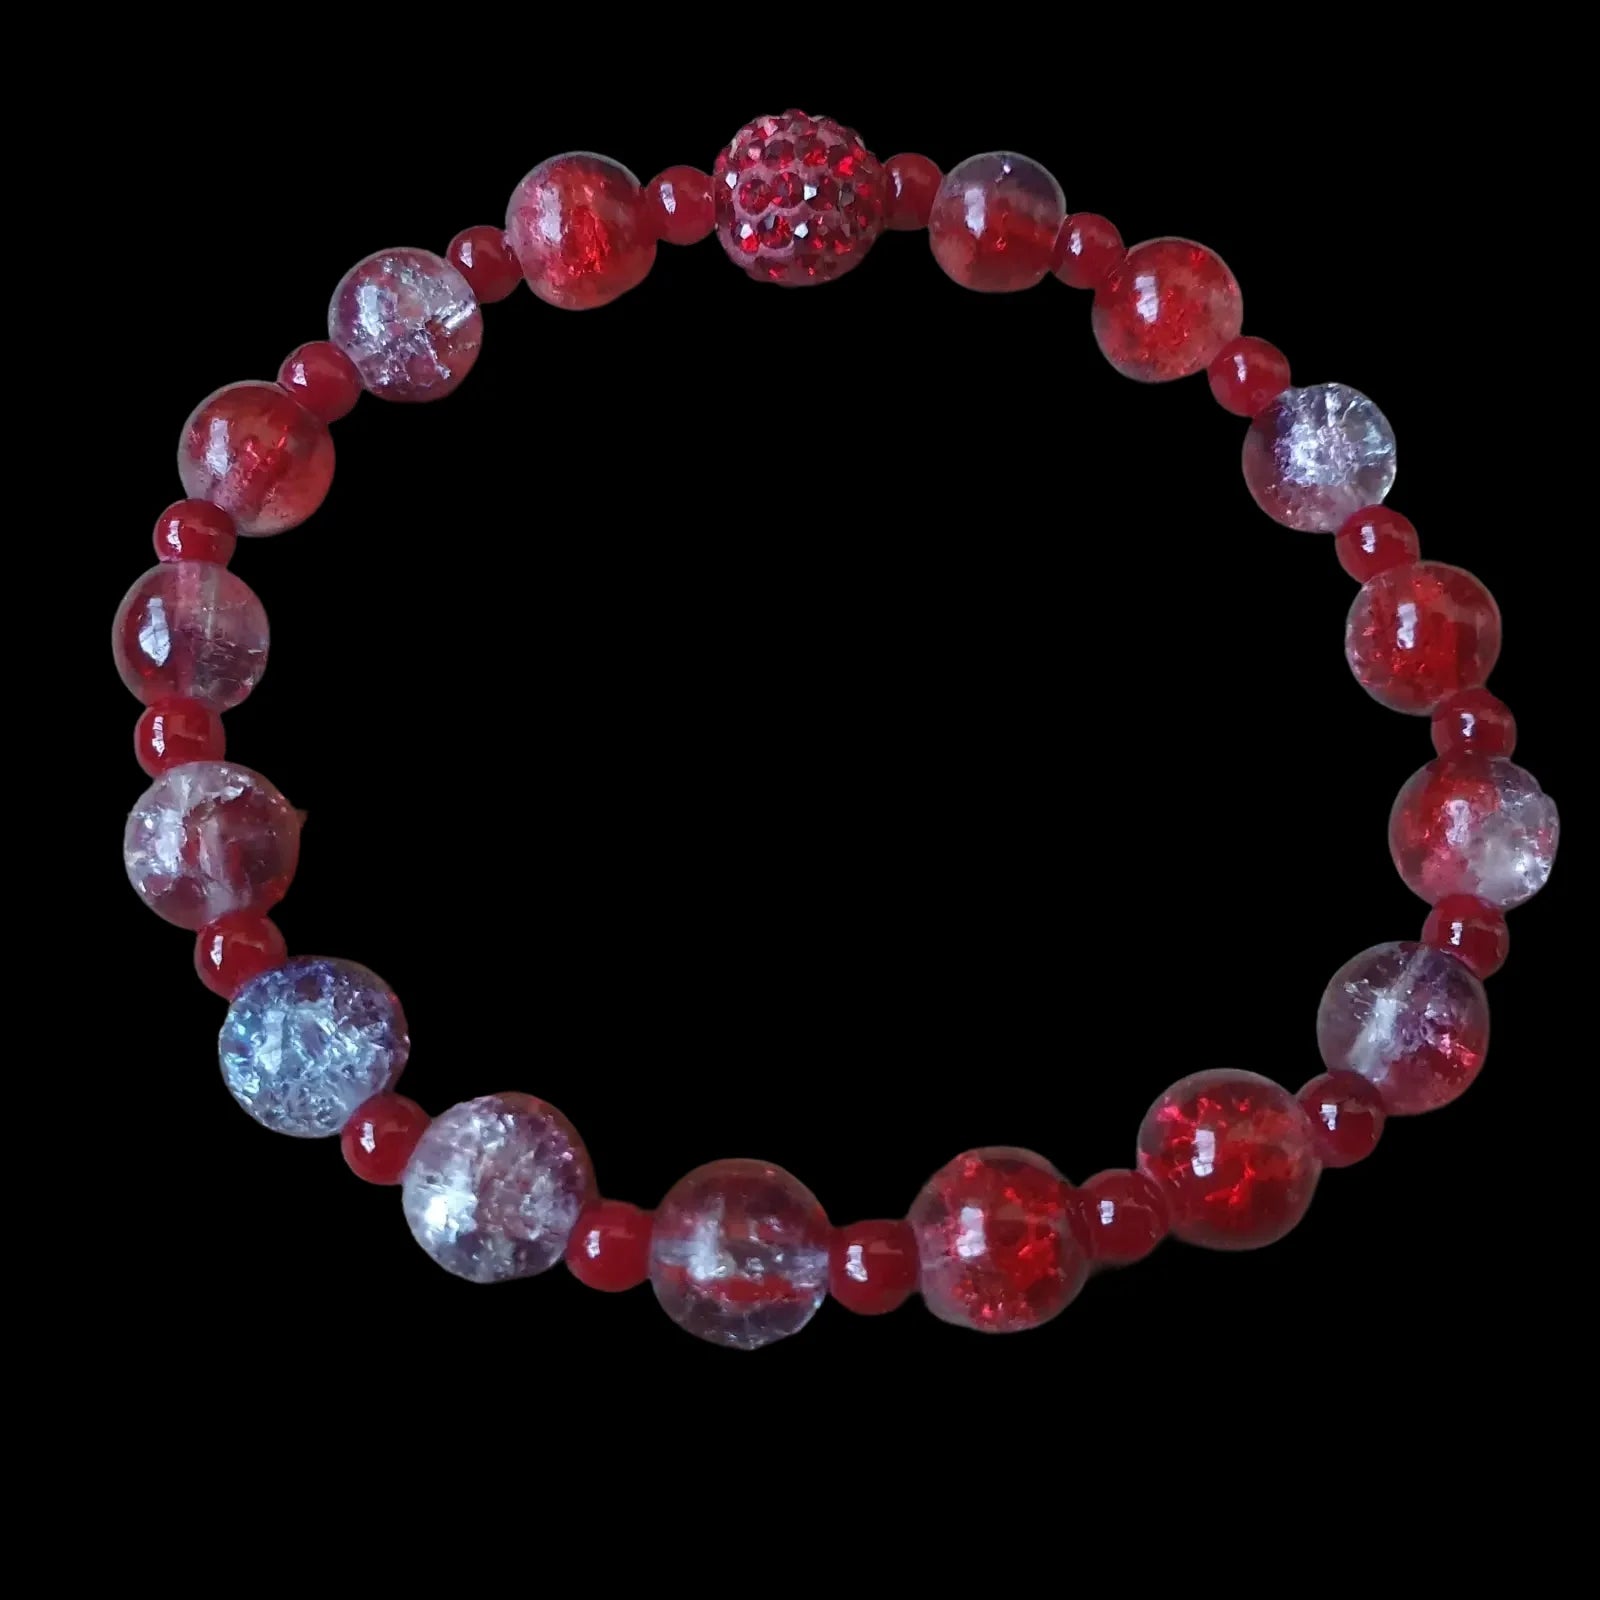 Unique Handmade Crafted Beaded Bracelet Red Gift